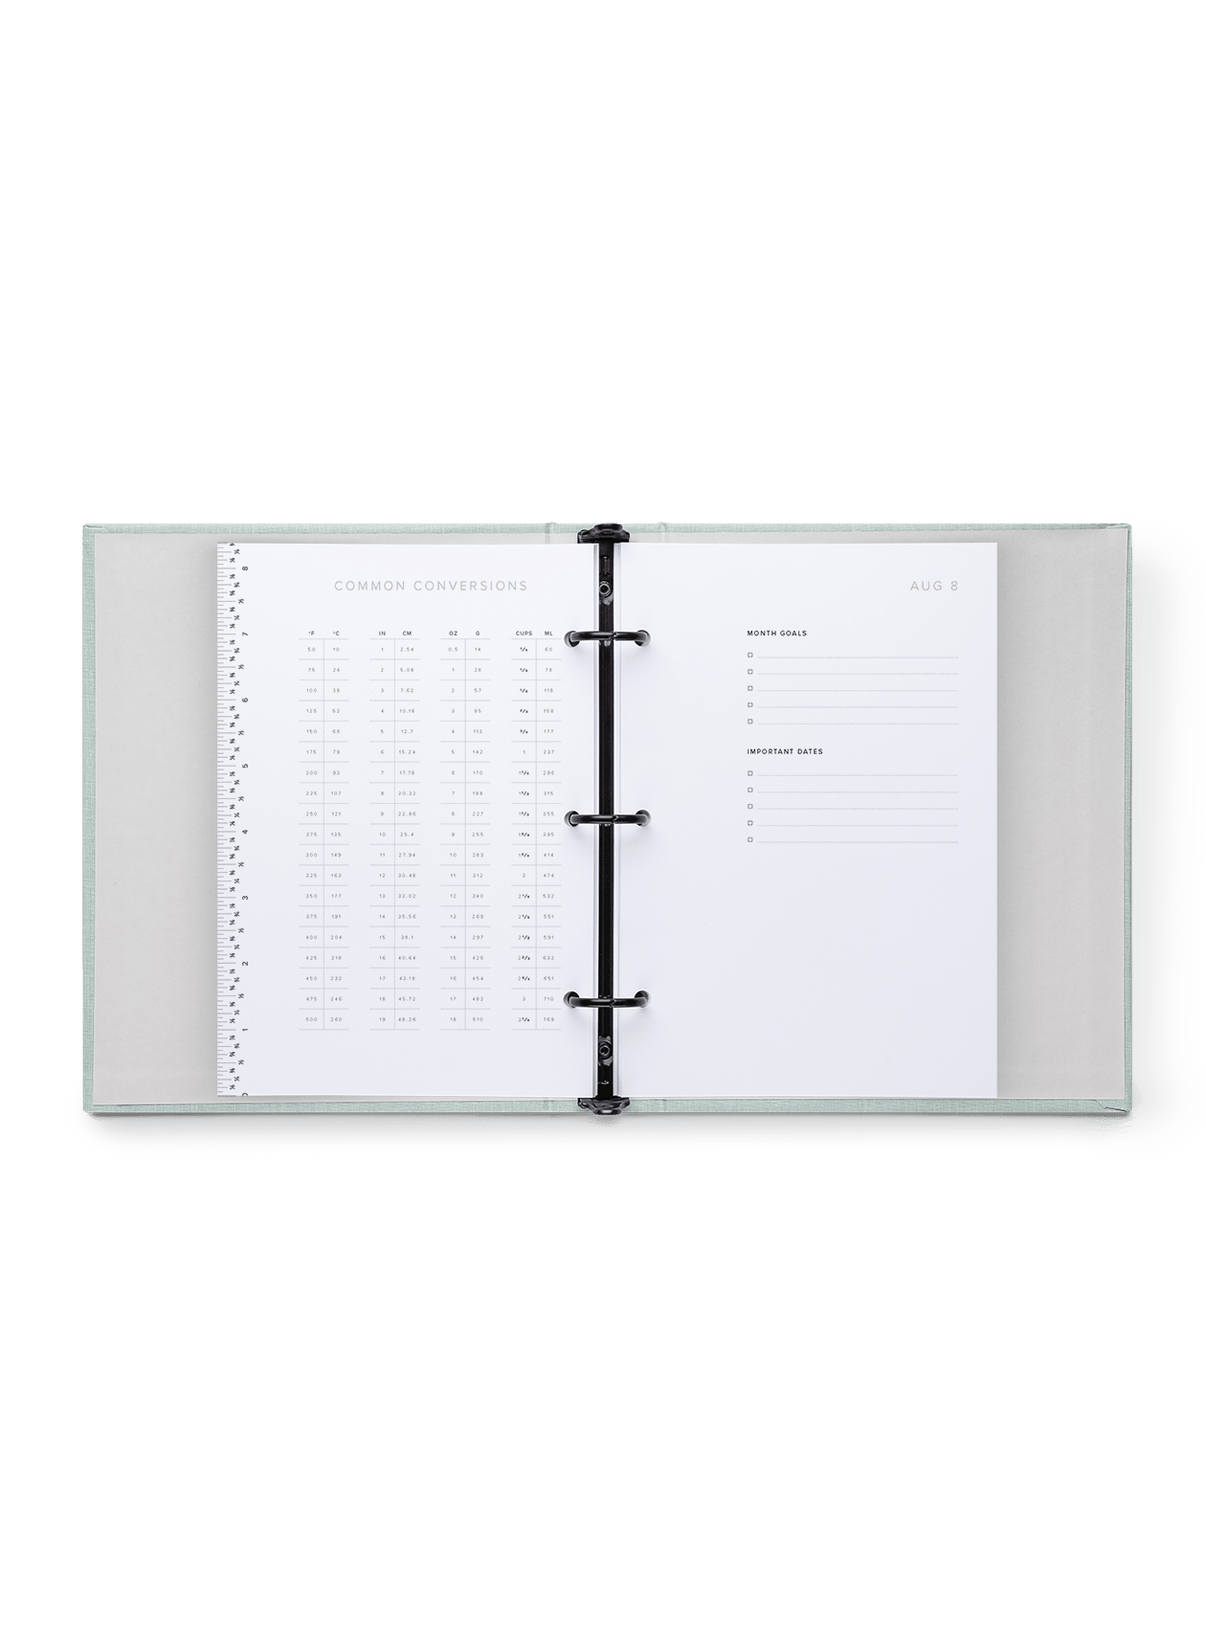 Compact binder conversion chart for metrics and monthly goal layout